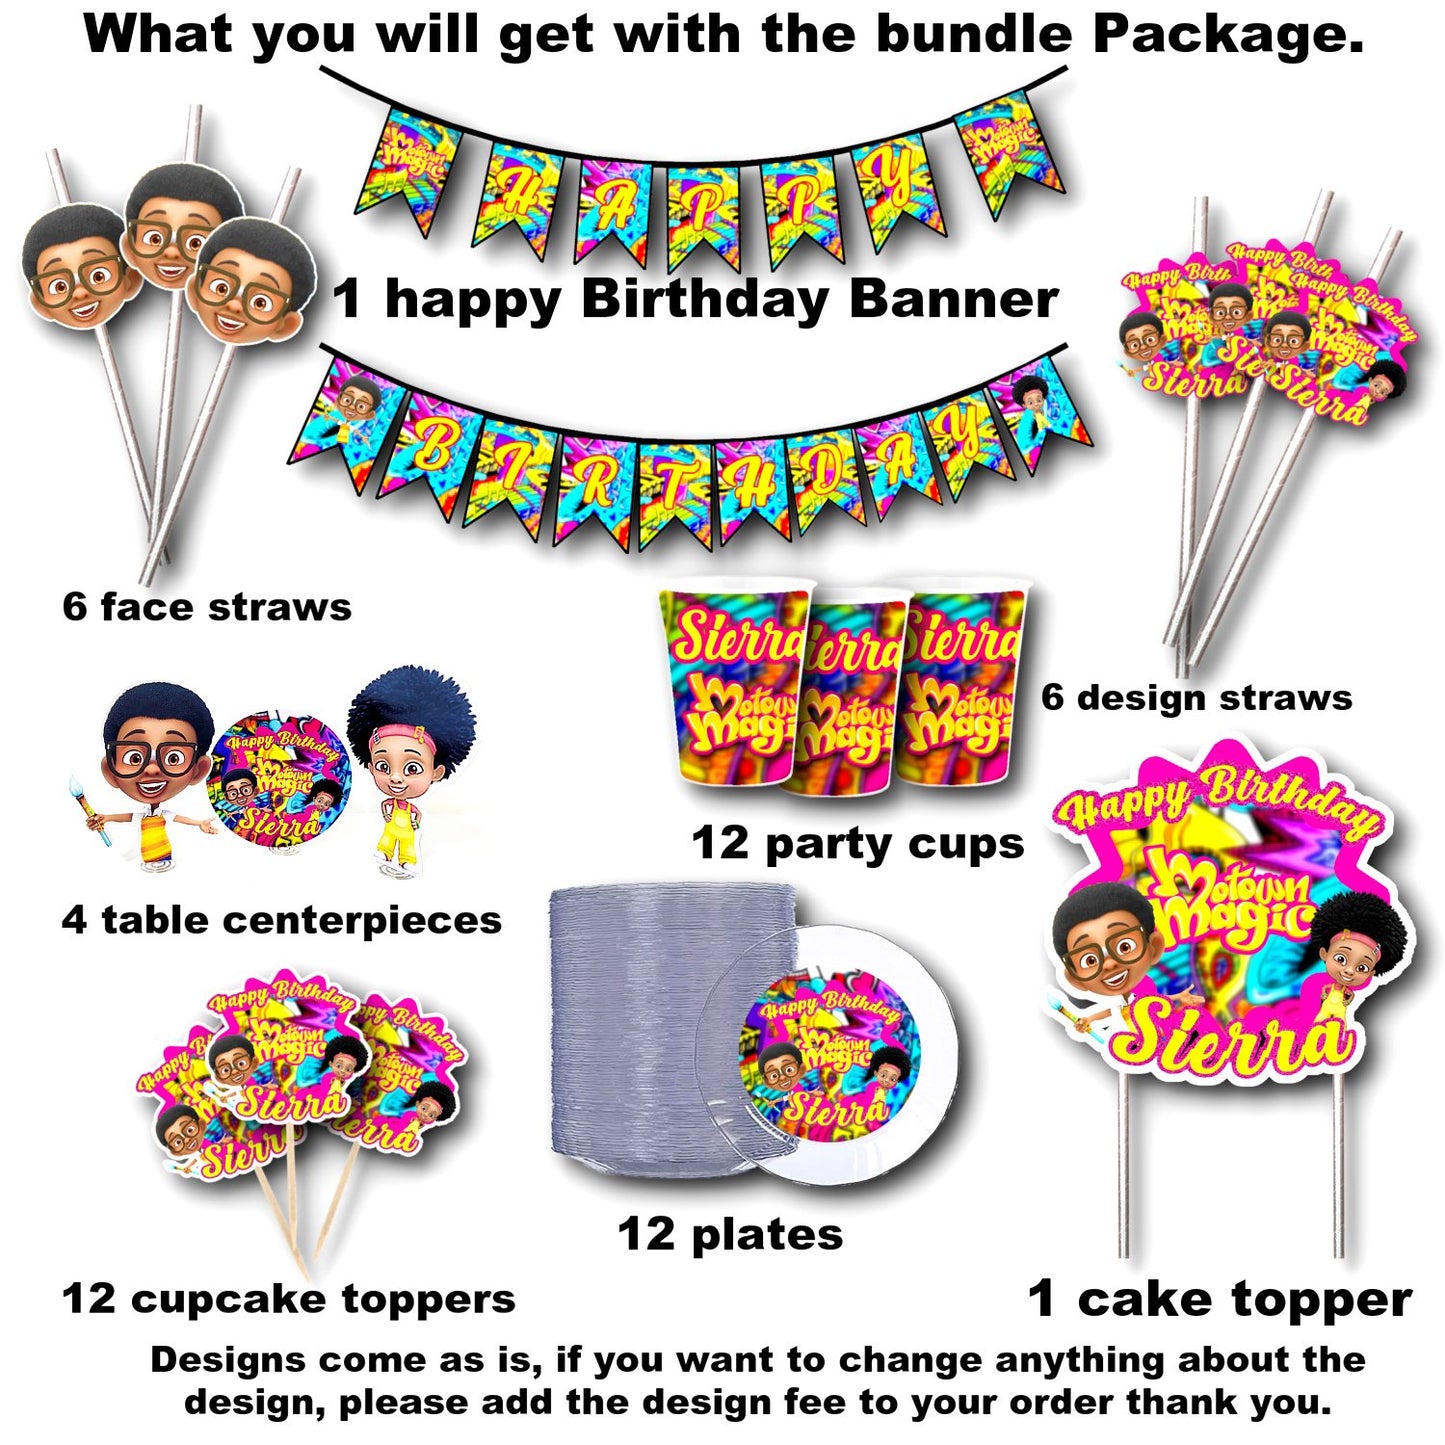 CHOOSE YOUR THEME Party Supplies